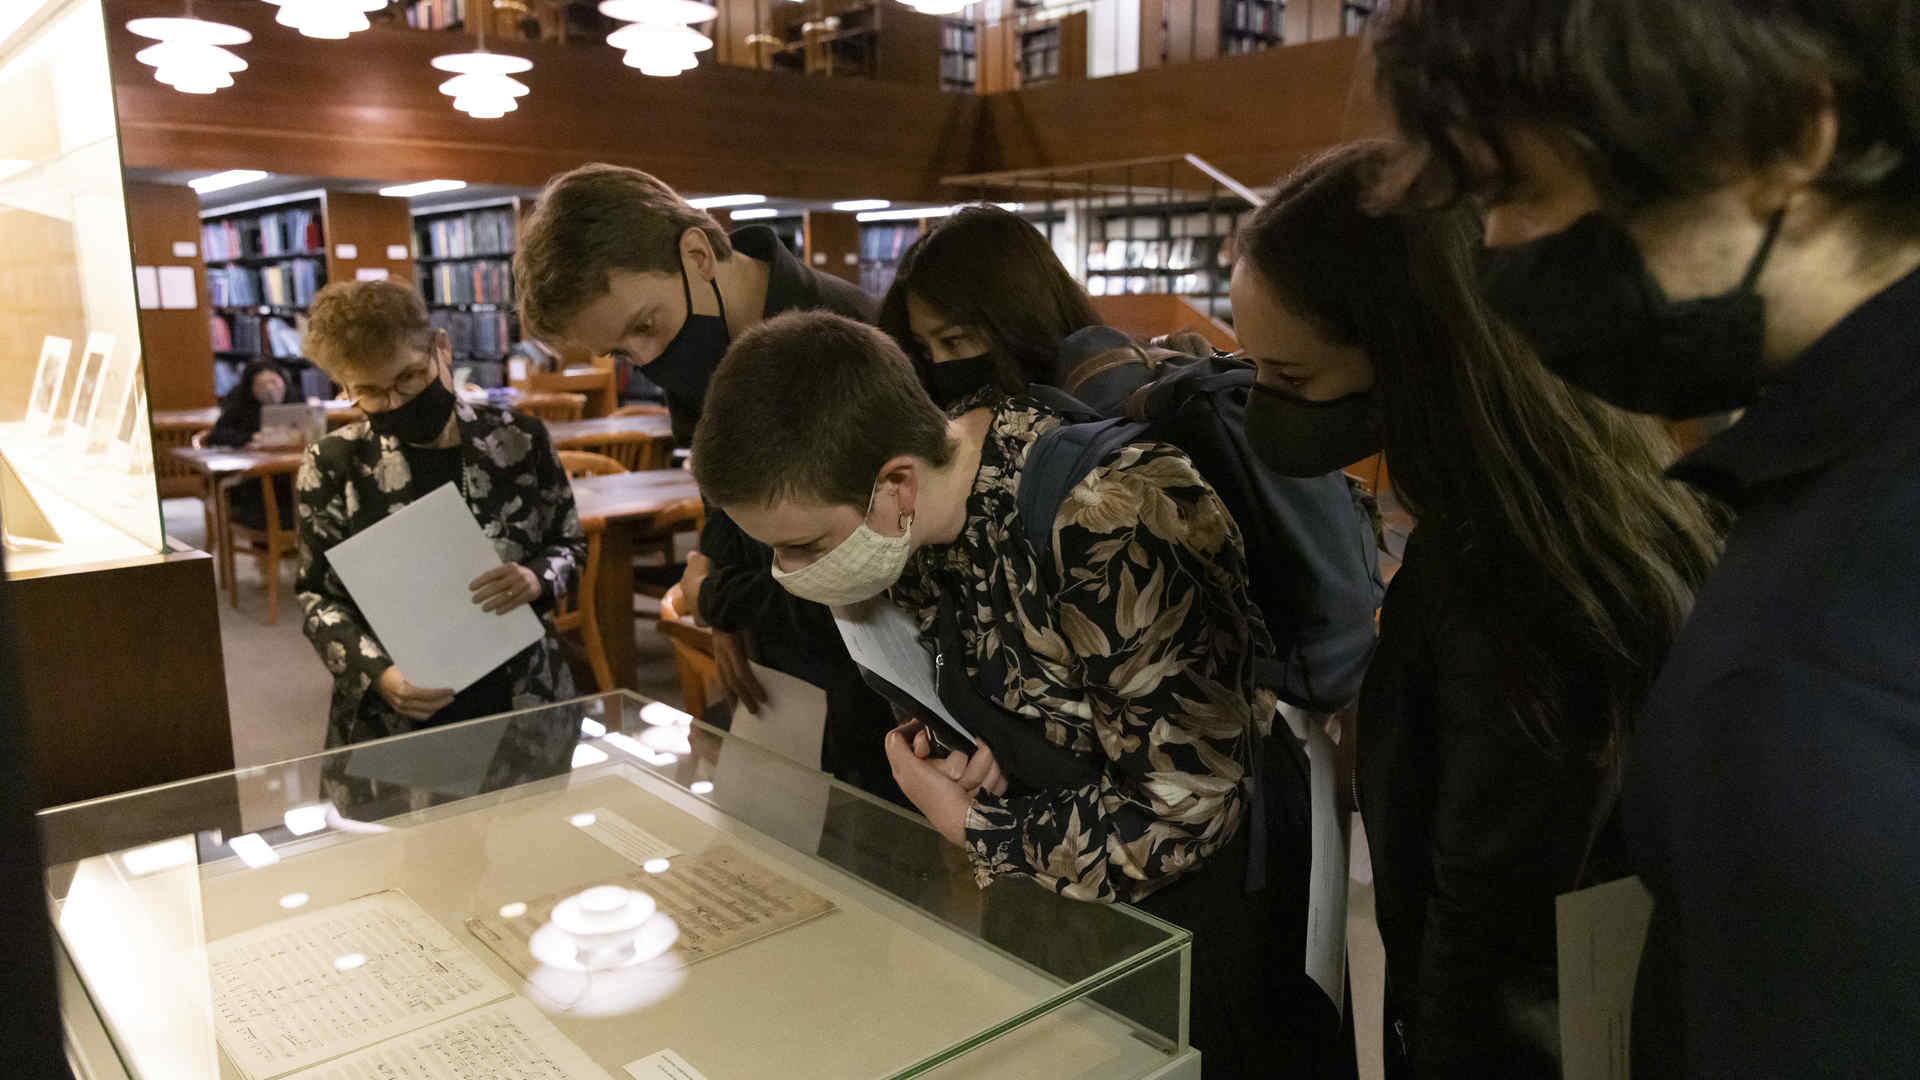 People in Juilliard's library leaning over a glass case examining one of Beethoven's scores